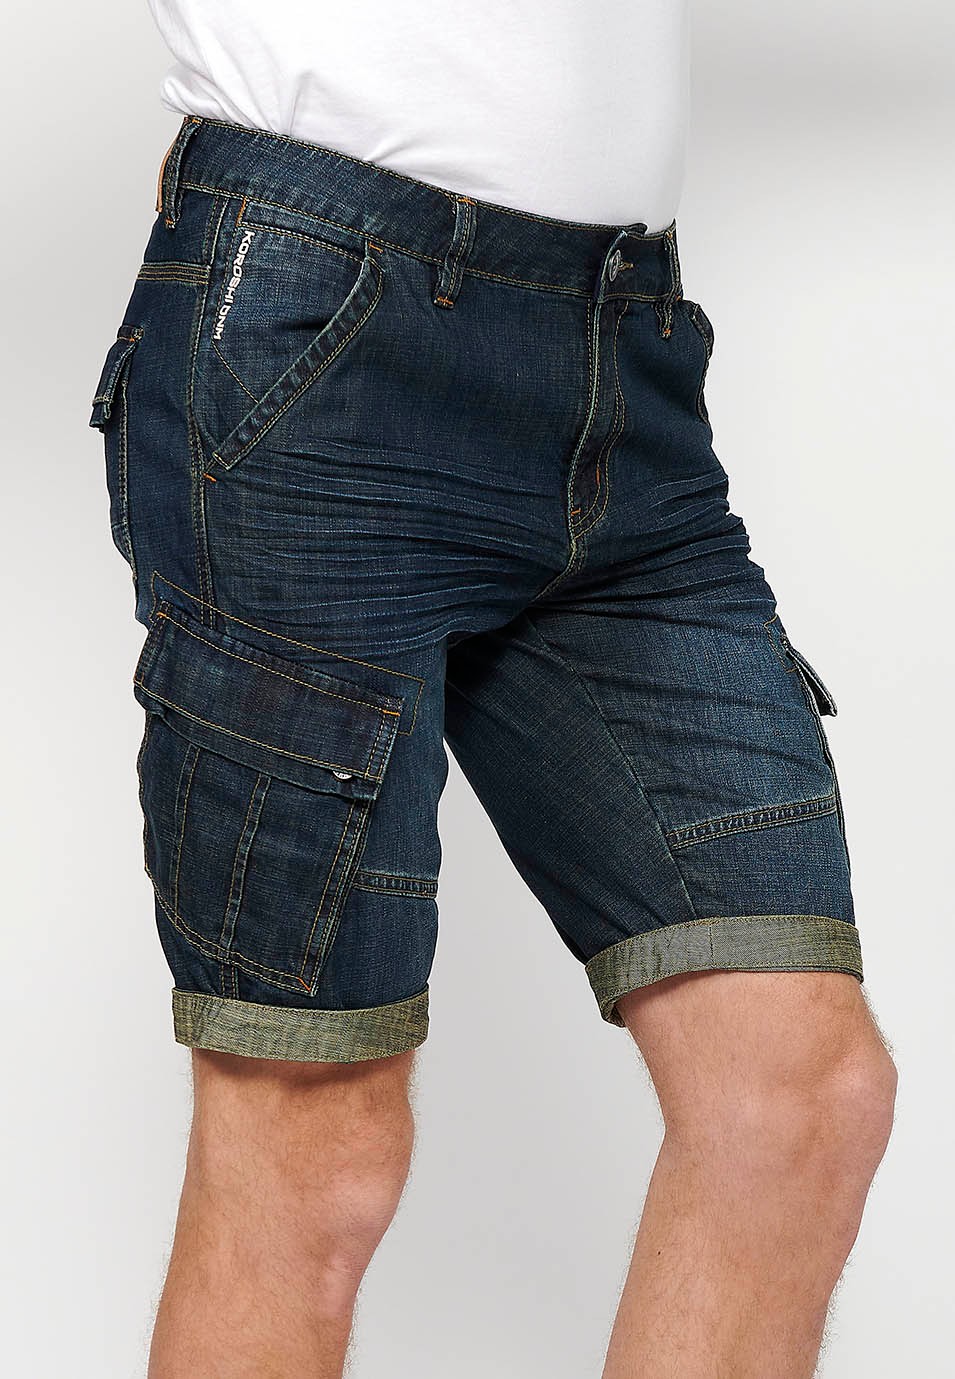 Blue Denim Bermuda Shorts with Side Cargo Pockets and Front Closure with Zipper and Button for Men 2